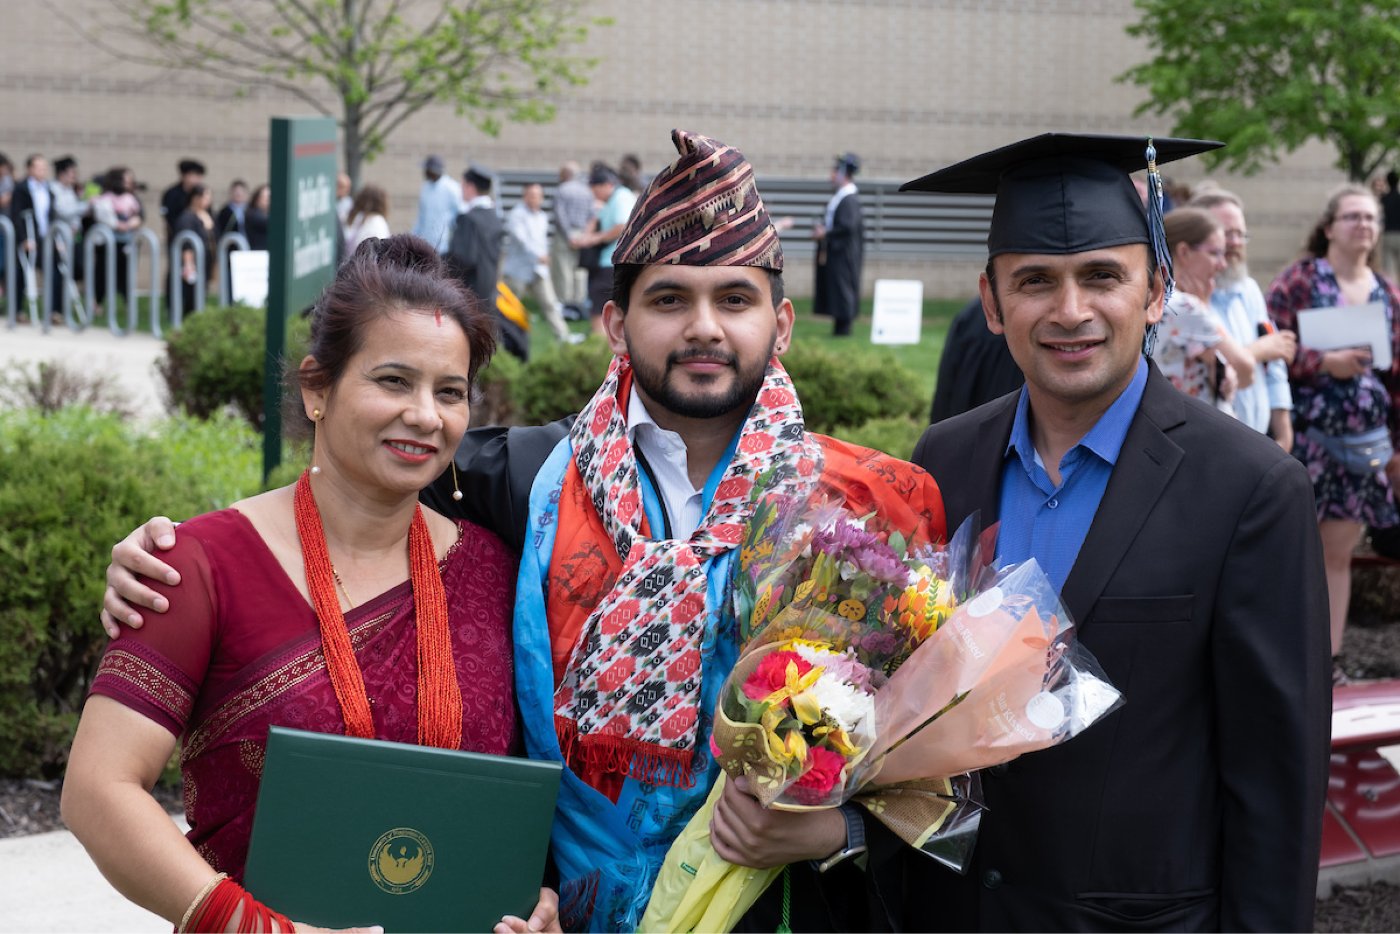 A family poses for a photo after the Commencement ceremony.